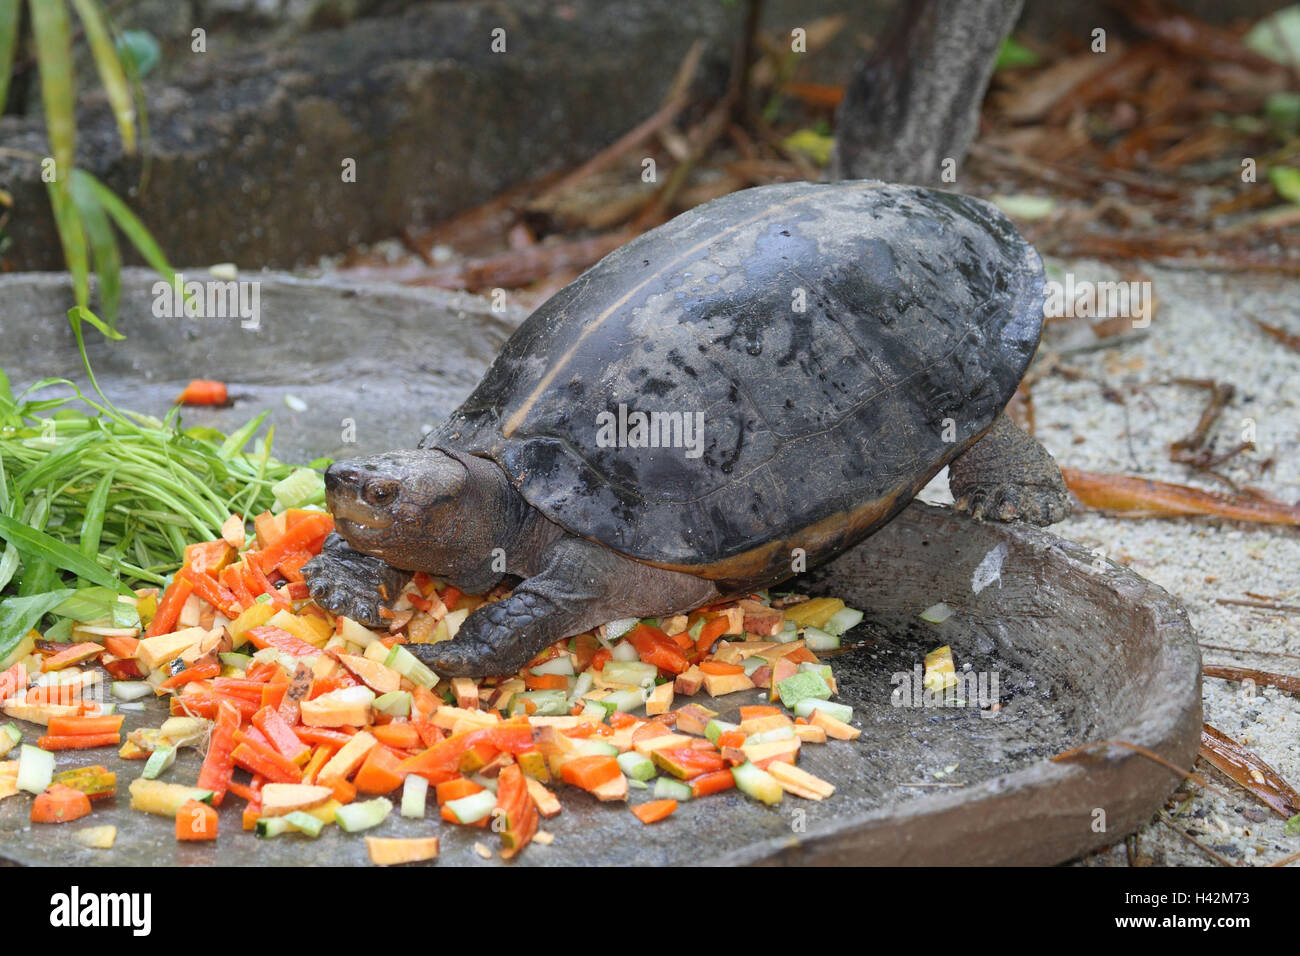 Giant-earth tortoise, lining place, Stock Photo